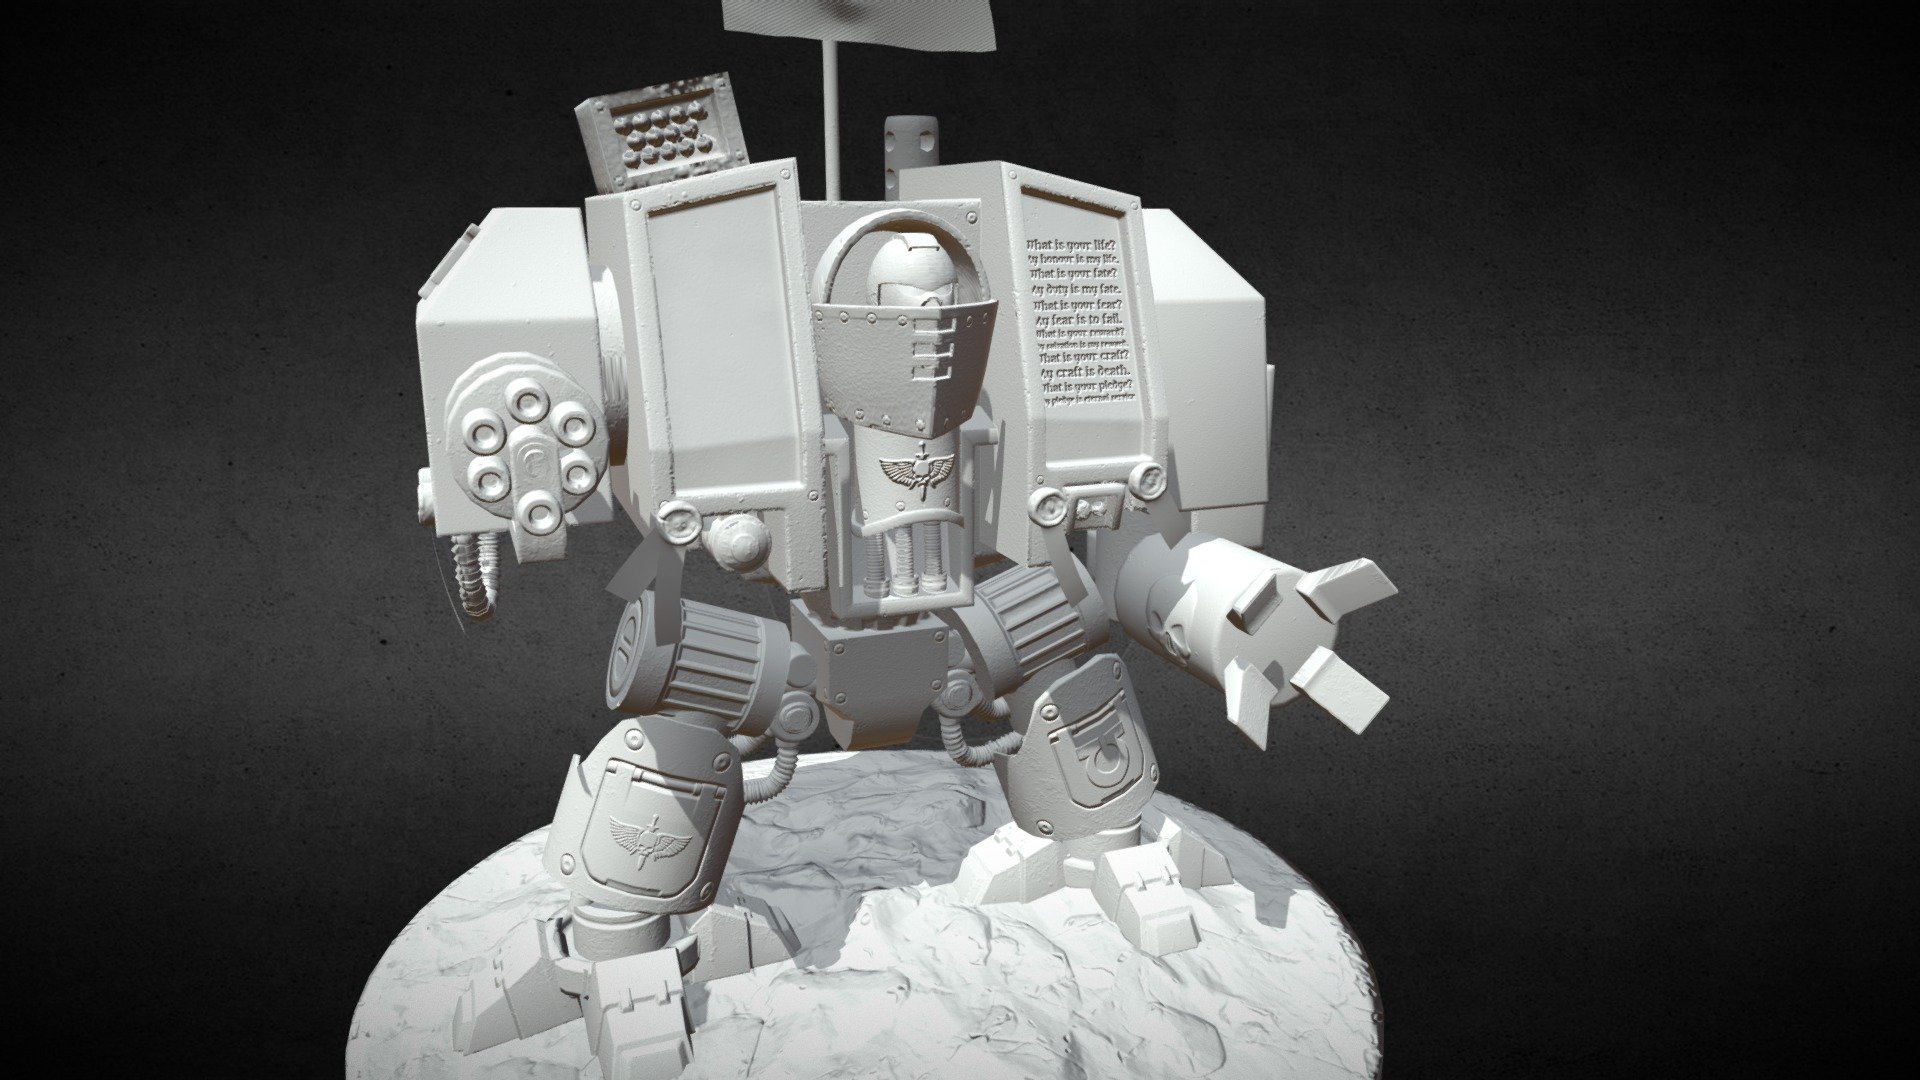 Here is WIP piece for a university project. I'm building a space marine venerable dreadnought. This is to show off my low poly, along with the bakes achieved using my high poly. I'll be uploading the textured version as soon as it is finished! - [WIP] WH40k Venerable Dreadnought - 3D model by Krypten22 3d model